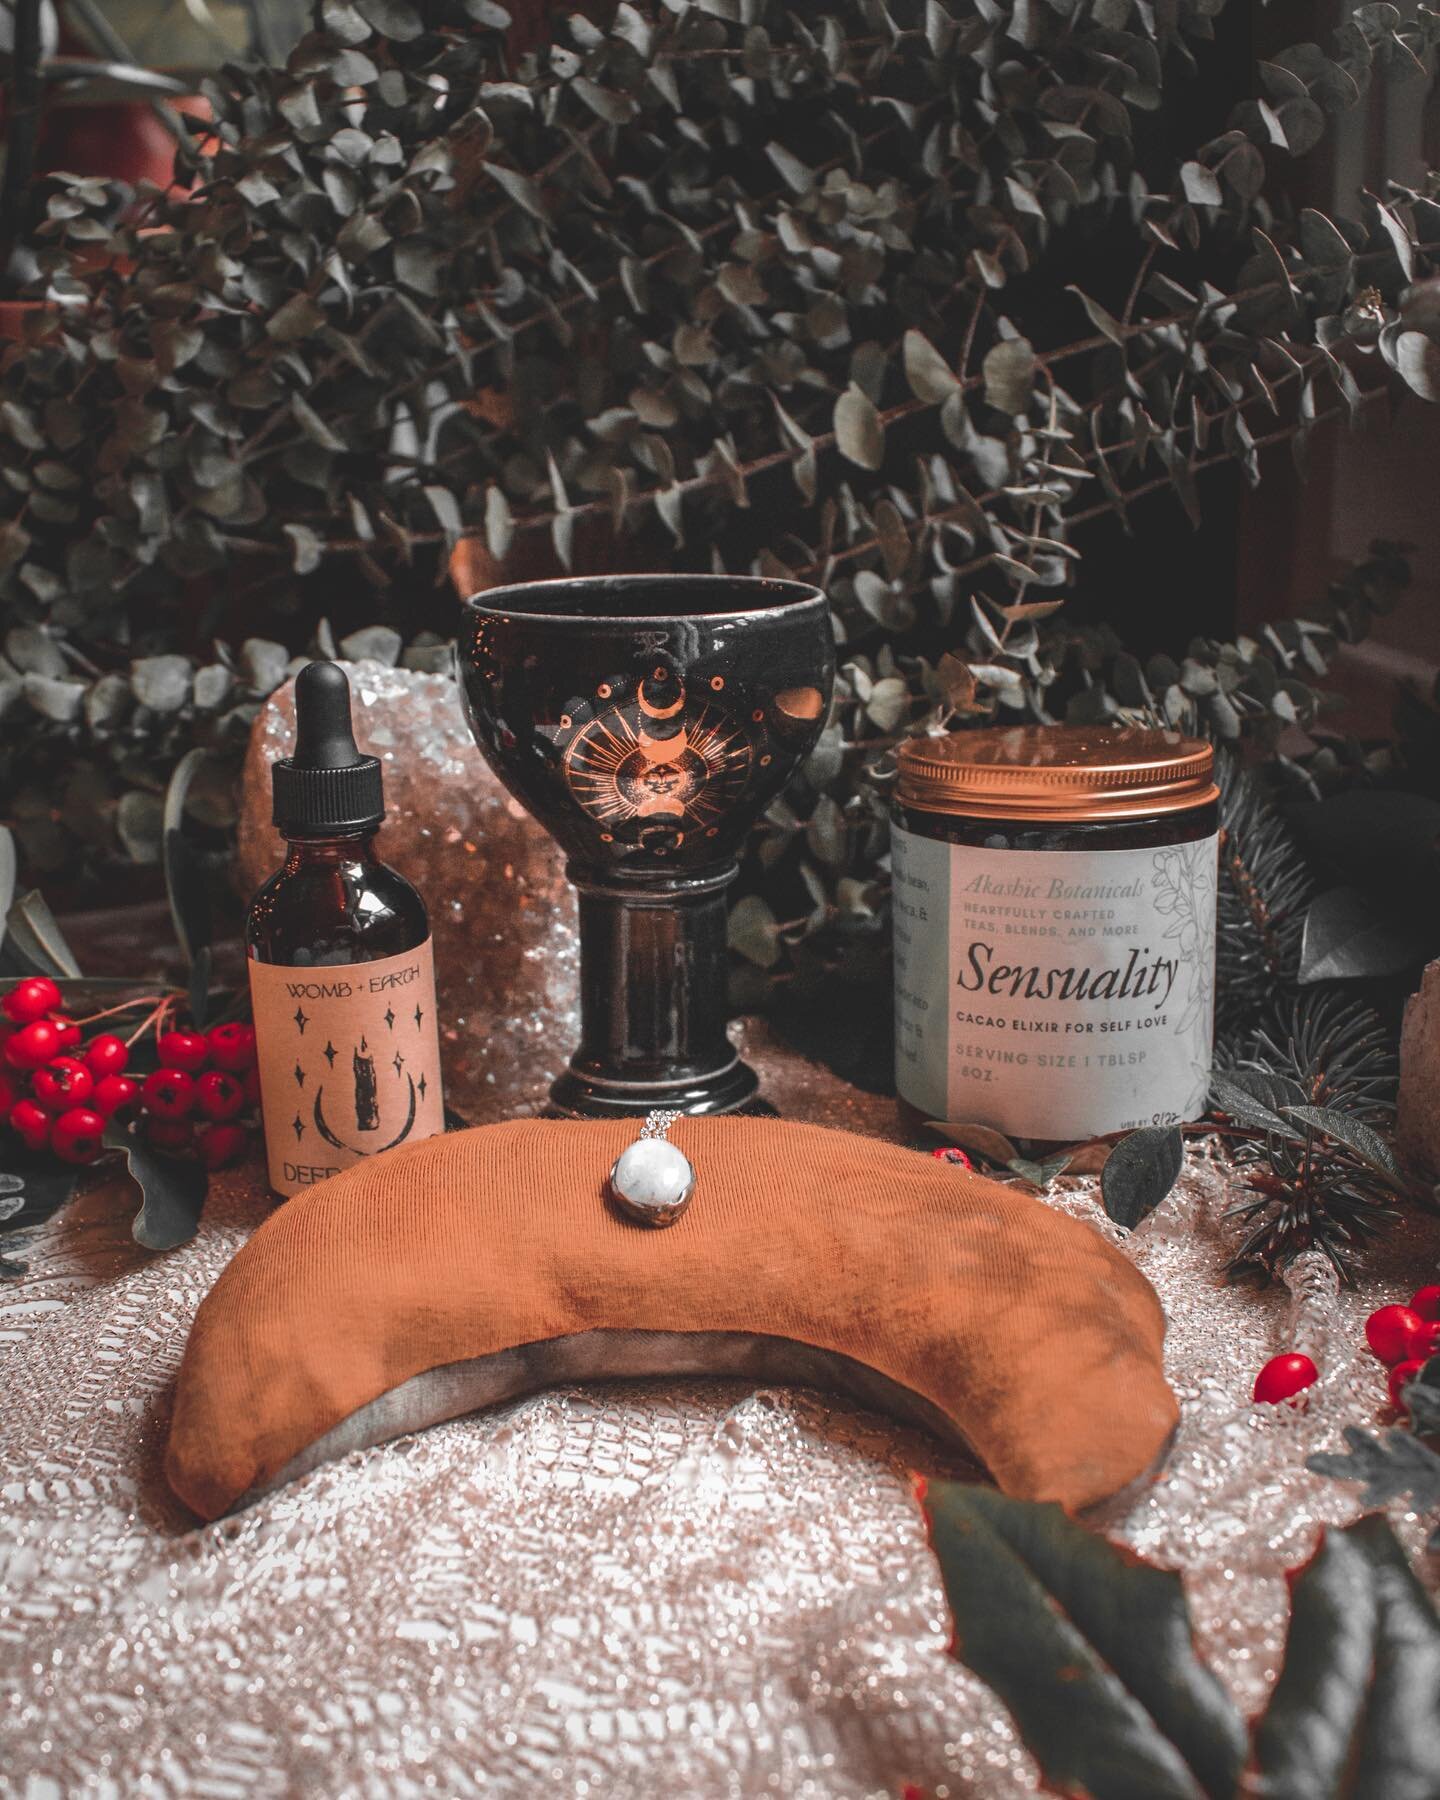 ❄️ WINTER SOLSTICE GIVEAWAY ❄️

I am honored to collab with some of my favorite small biz babes in a giveaway! 

Winter Solstice ~ The longest night of the year holds space for our inner self, as the season shifts deeper into the darkness of Winter. 